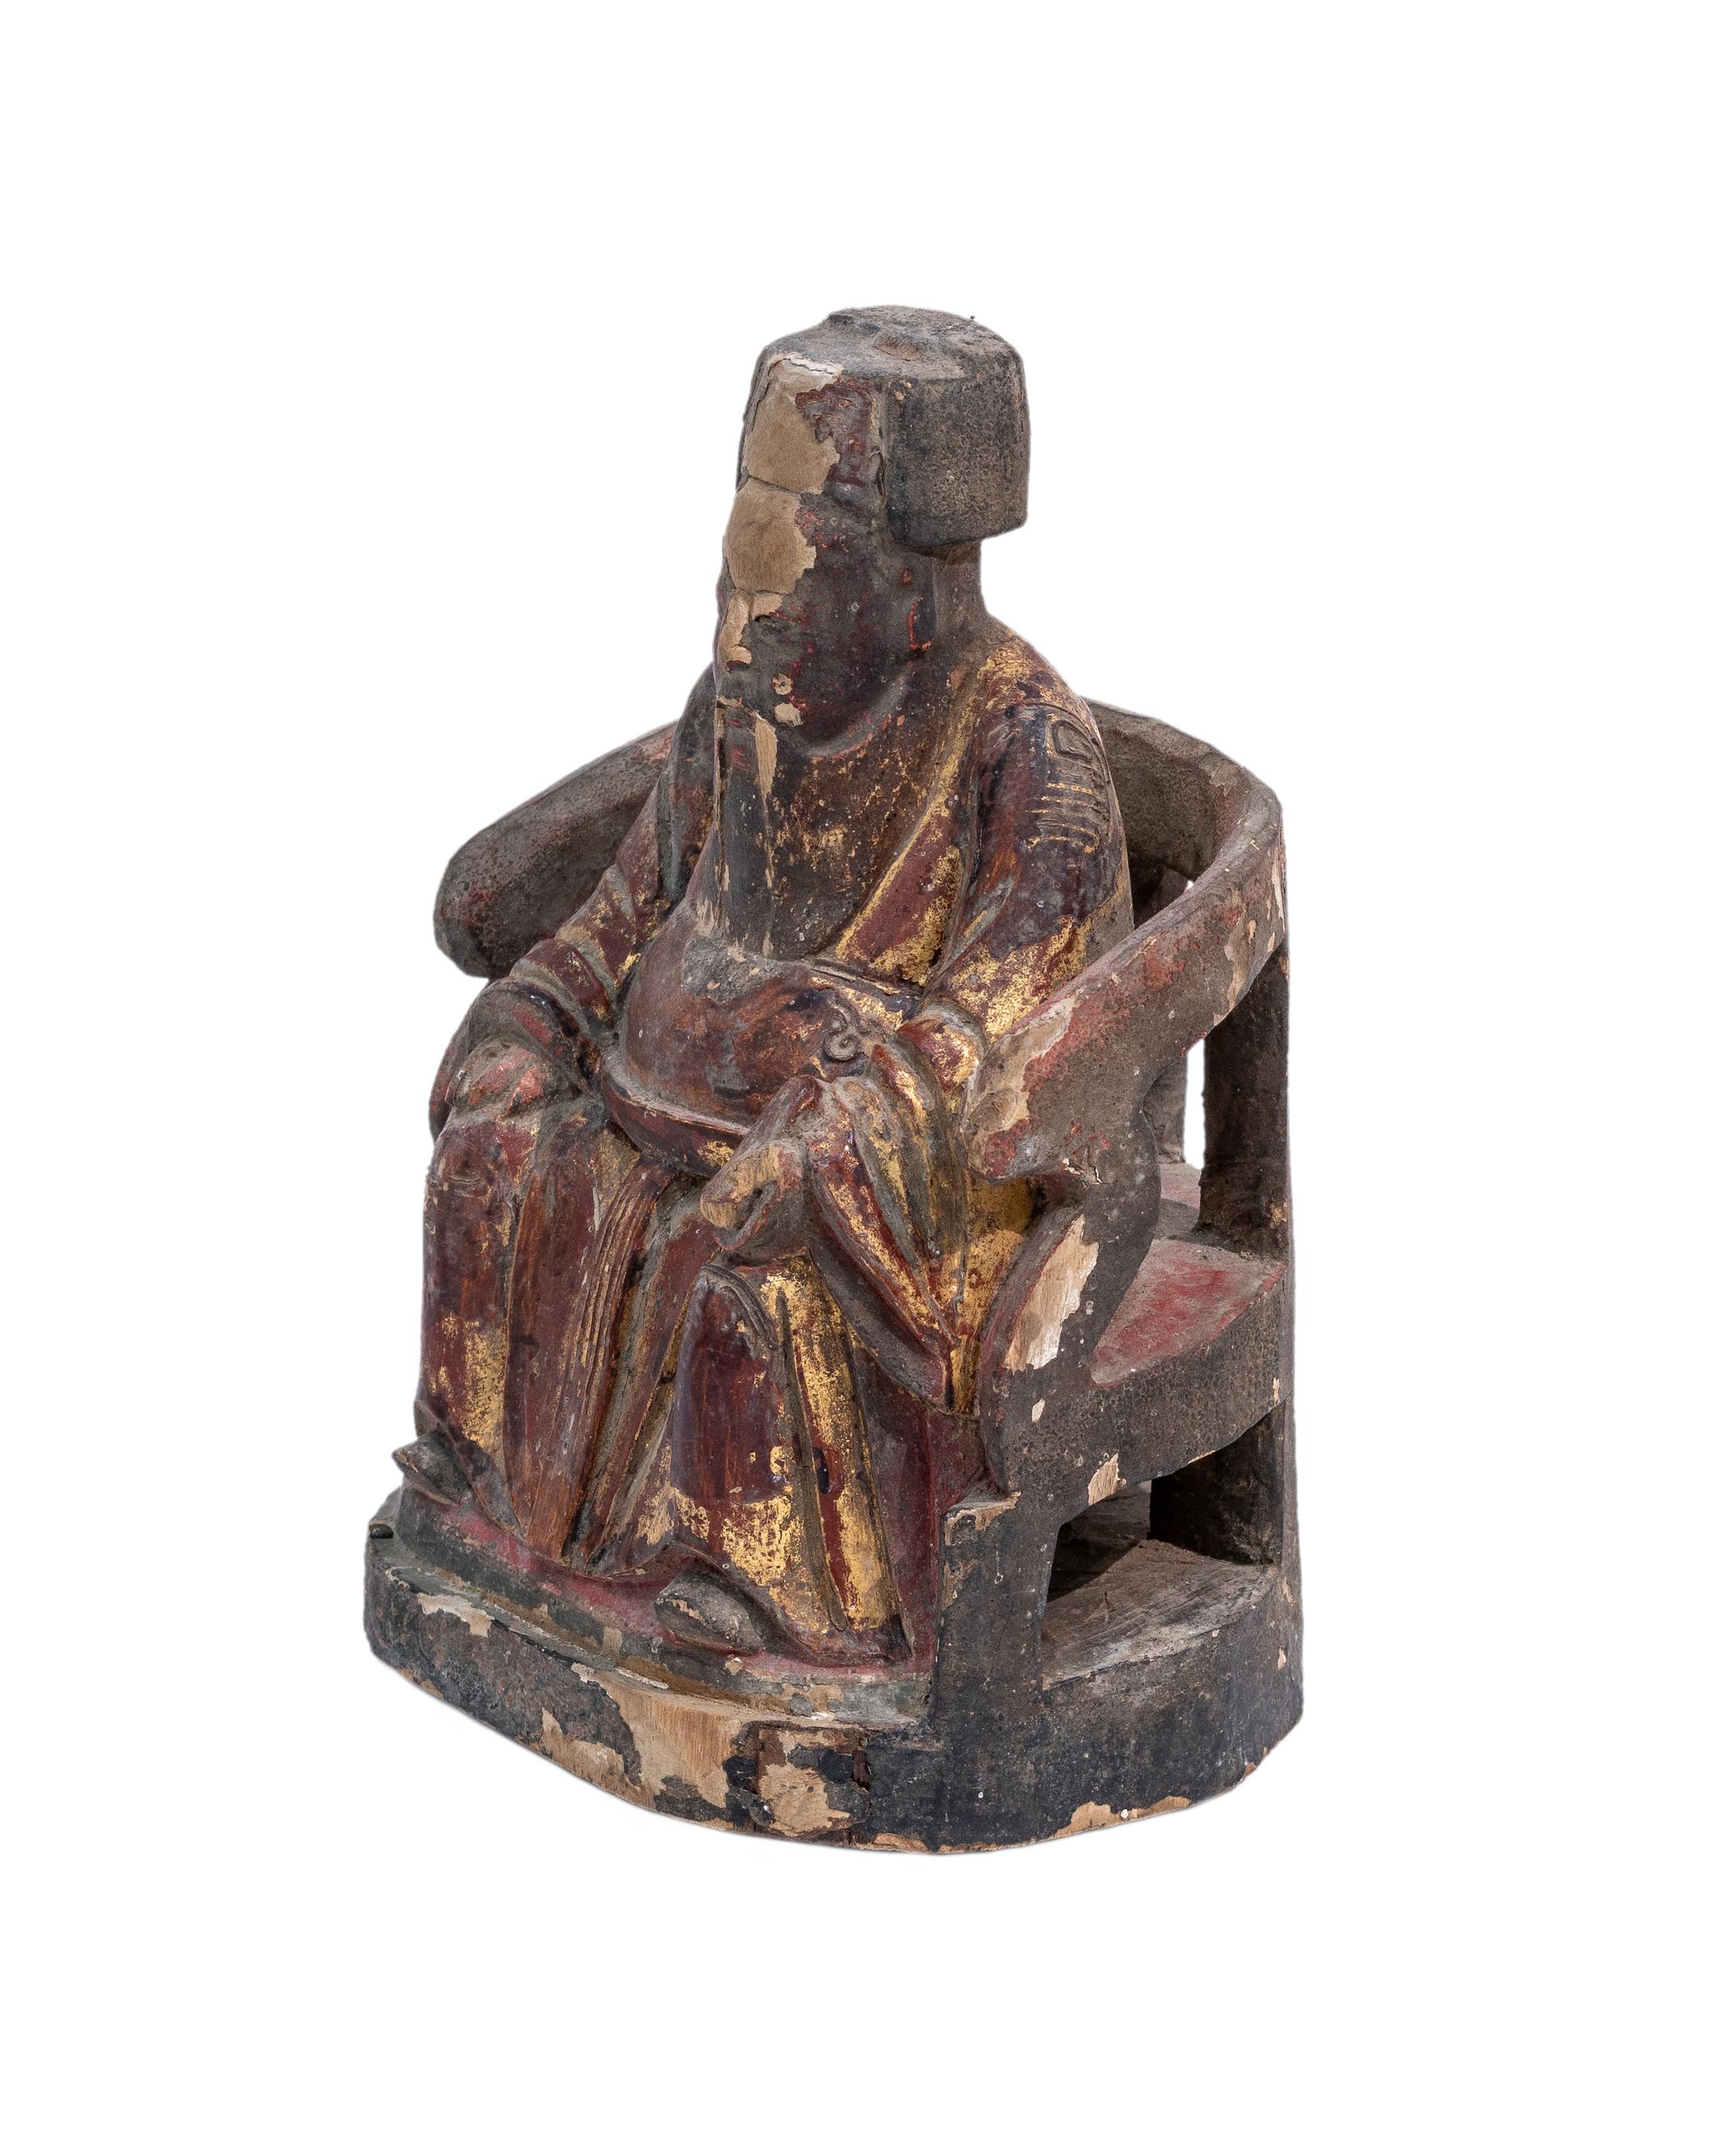 A wooden sculpture of a Chinese Earth God, from Fujian province, China. The deity and his armchair is carved out from a single piece of wood. This Earth God has a kindly face, the sculpture is in very good shape and it is in 100% original condition.